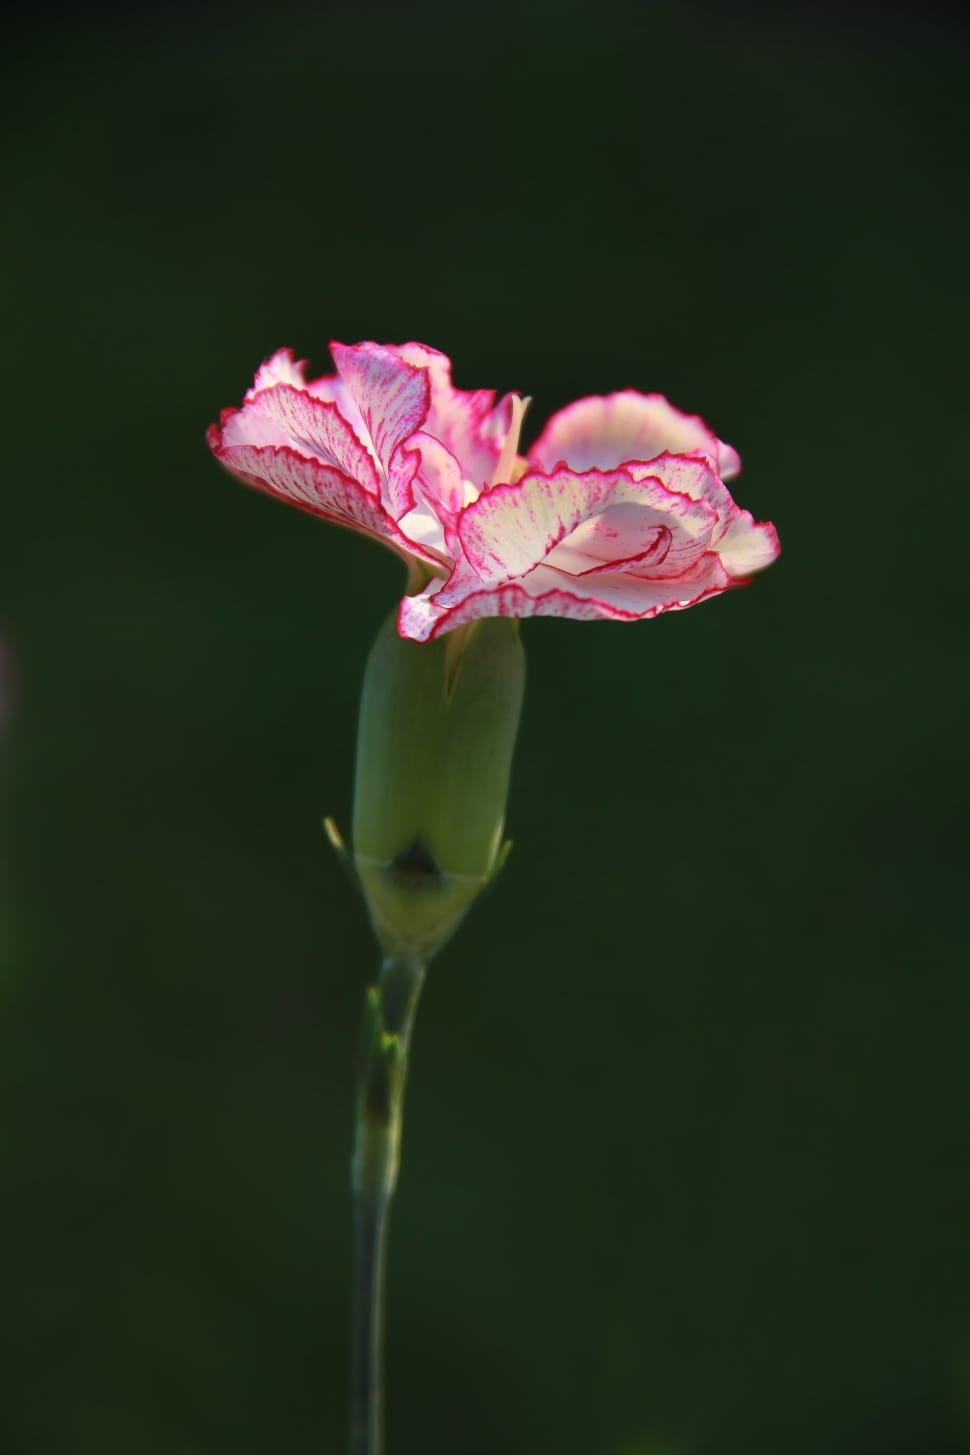 pink and white carnation flower in close up photography preview